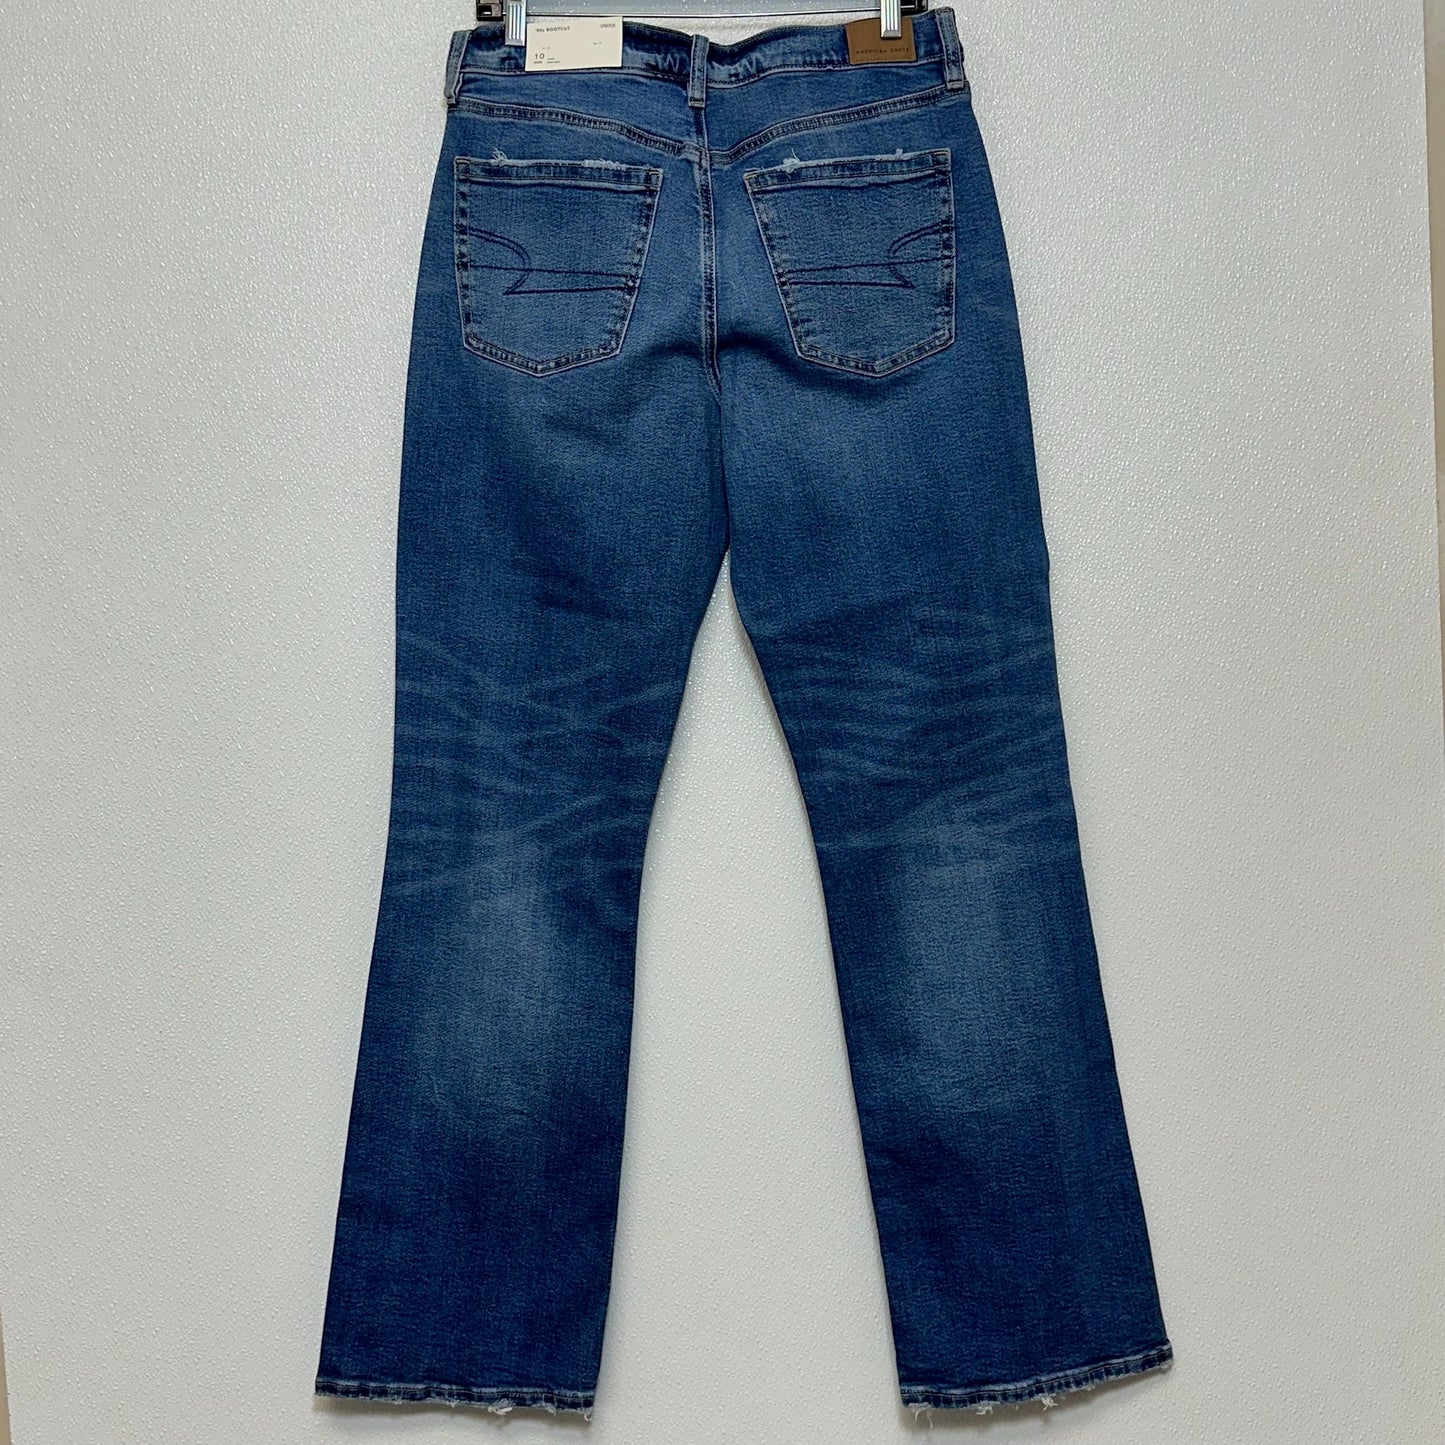 Jeans Relaxed/boyfriend By American Eagle  Size: 10L